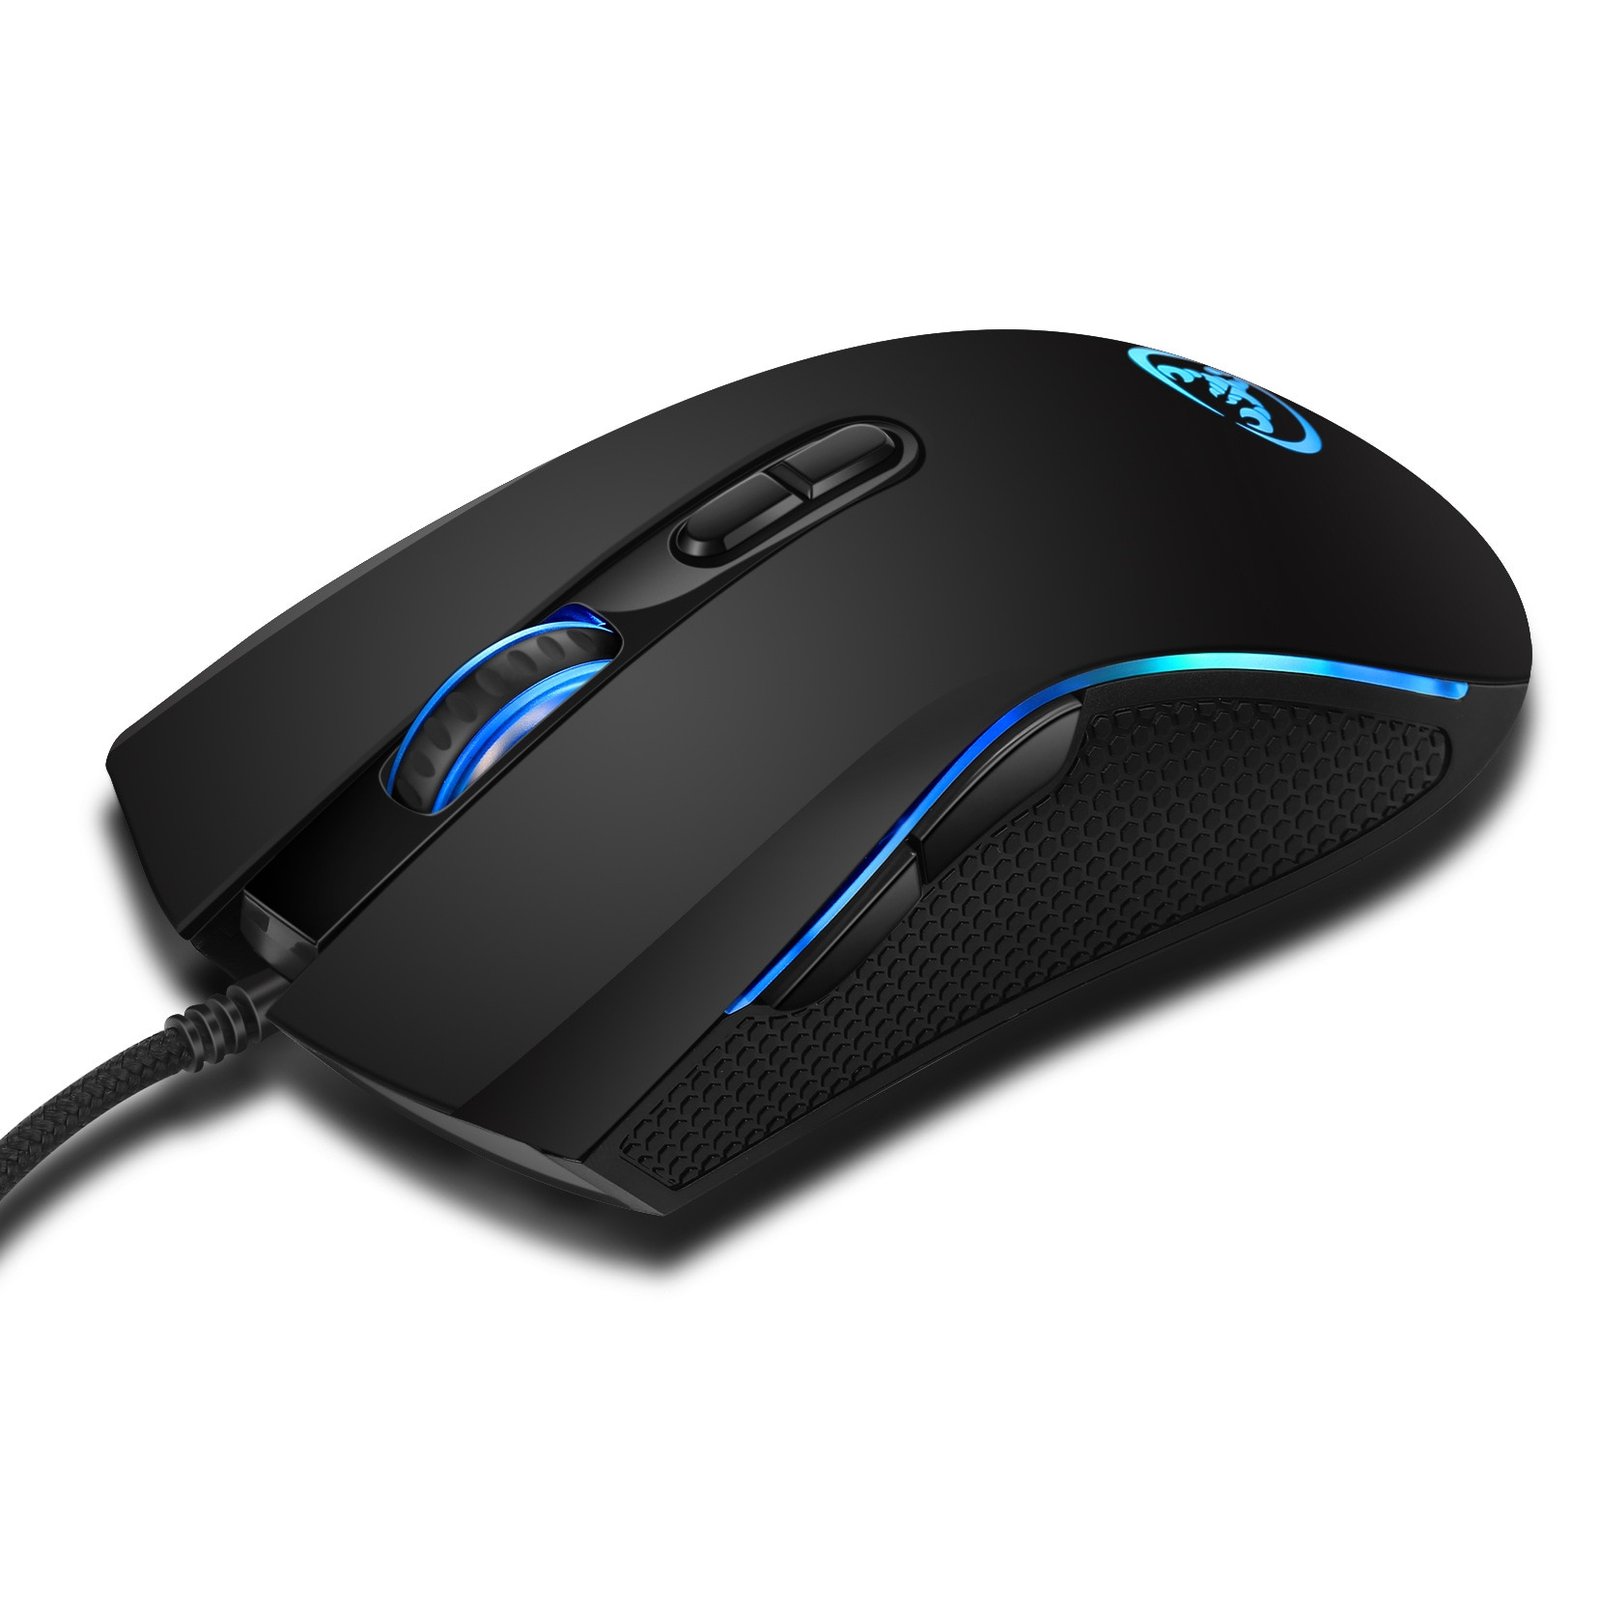 Hongsund  High-end optical professional gaming mouse with 7 bright colors LED backlit and ergonomics design For LOL CS